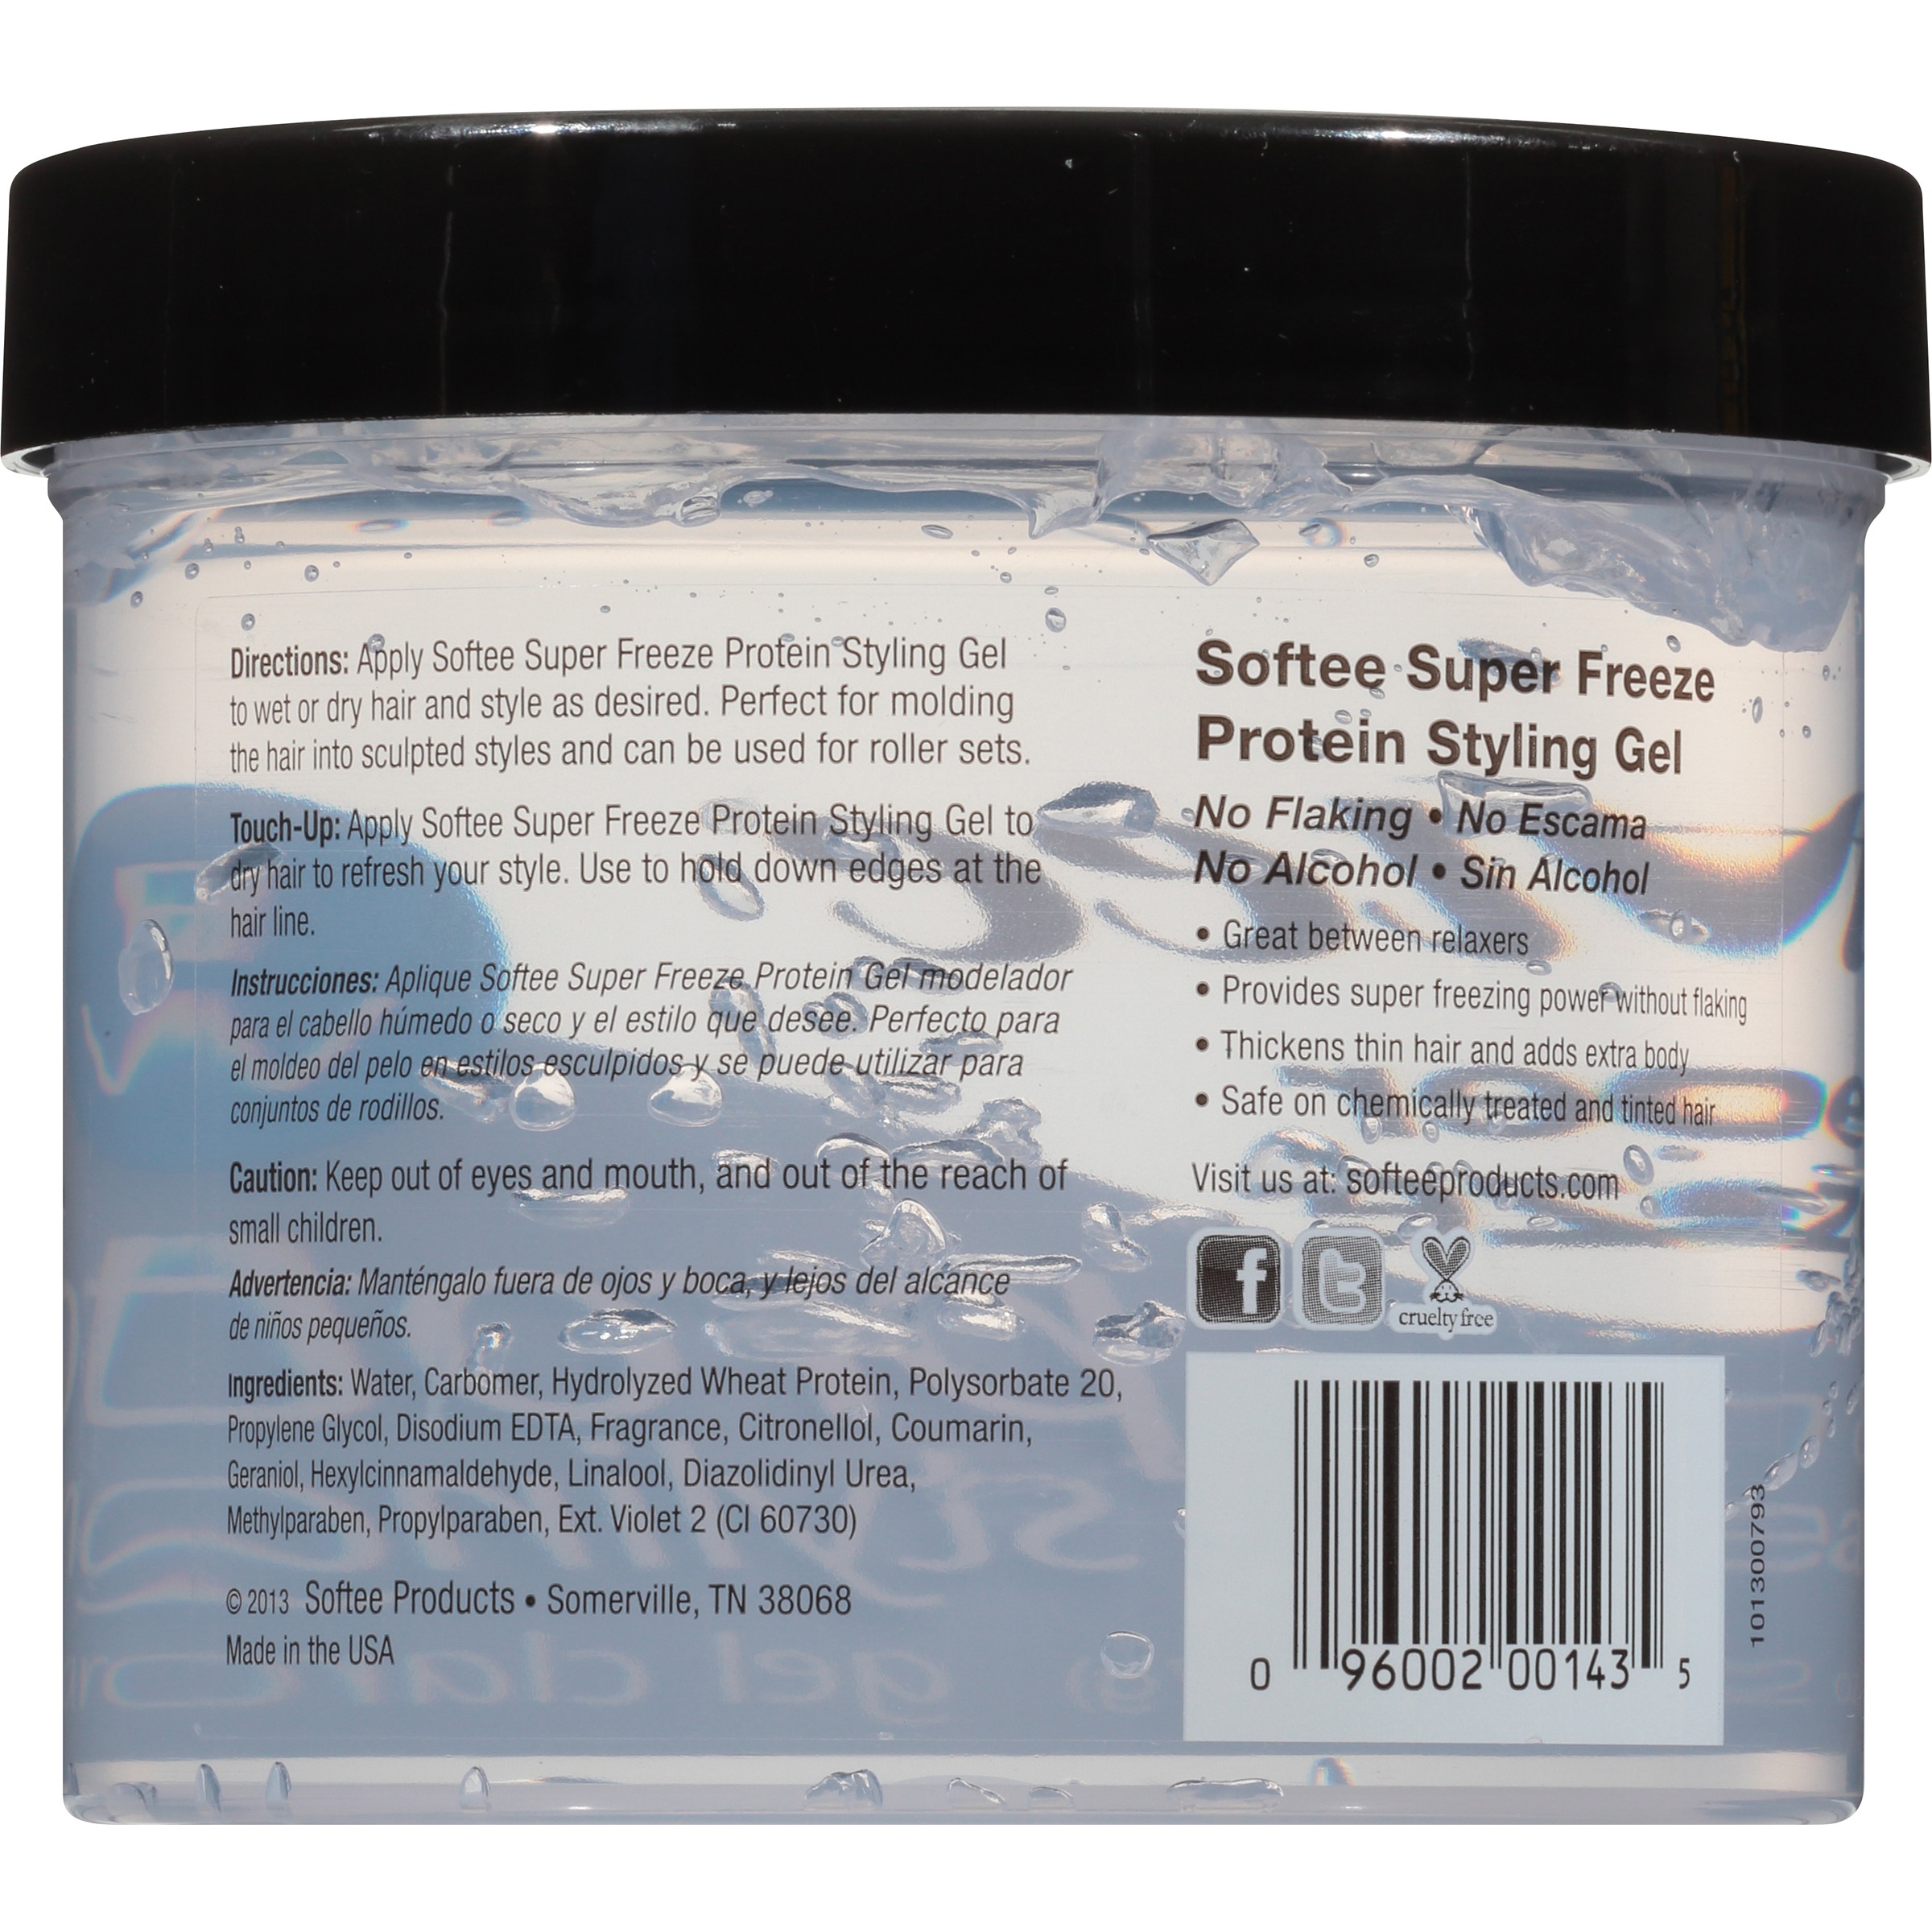 Softee Super Freeze Protein Styling Gel 32 oz. Jar, No Flake, Strengthens Hair,  Unisex - image 3 of 6